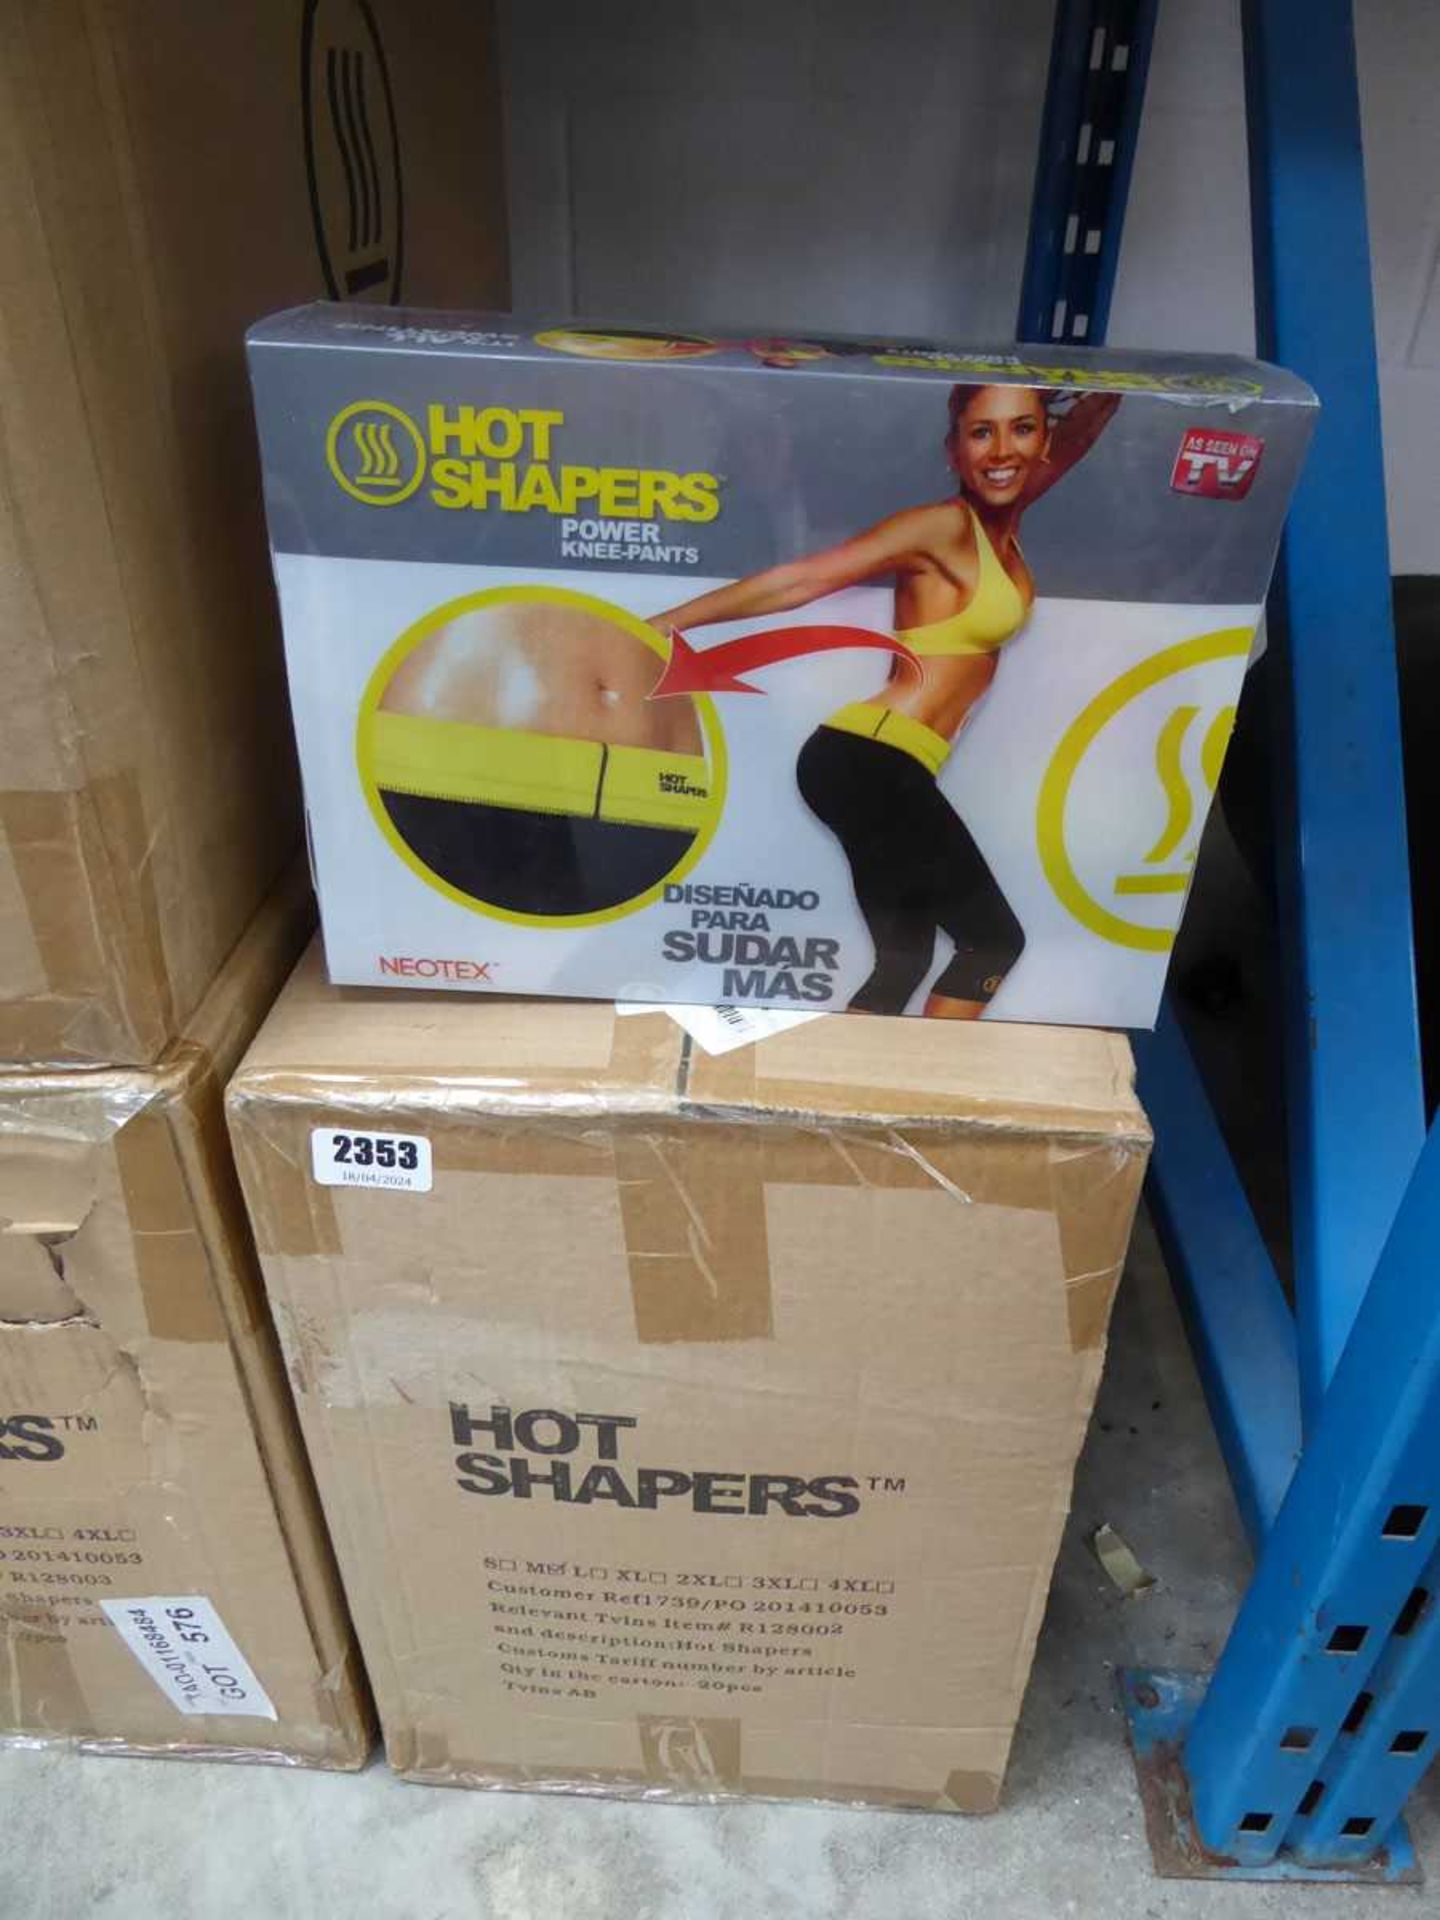 Box containing 20 pairs of hot shapers fitness power knee pant sets